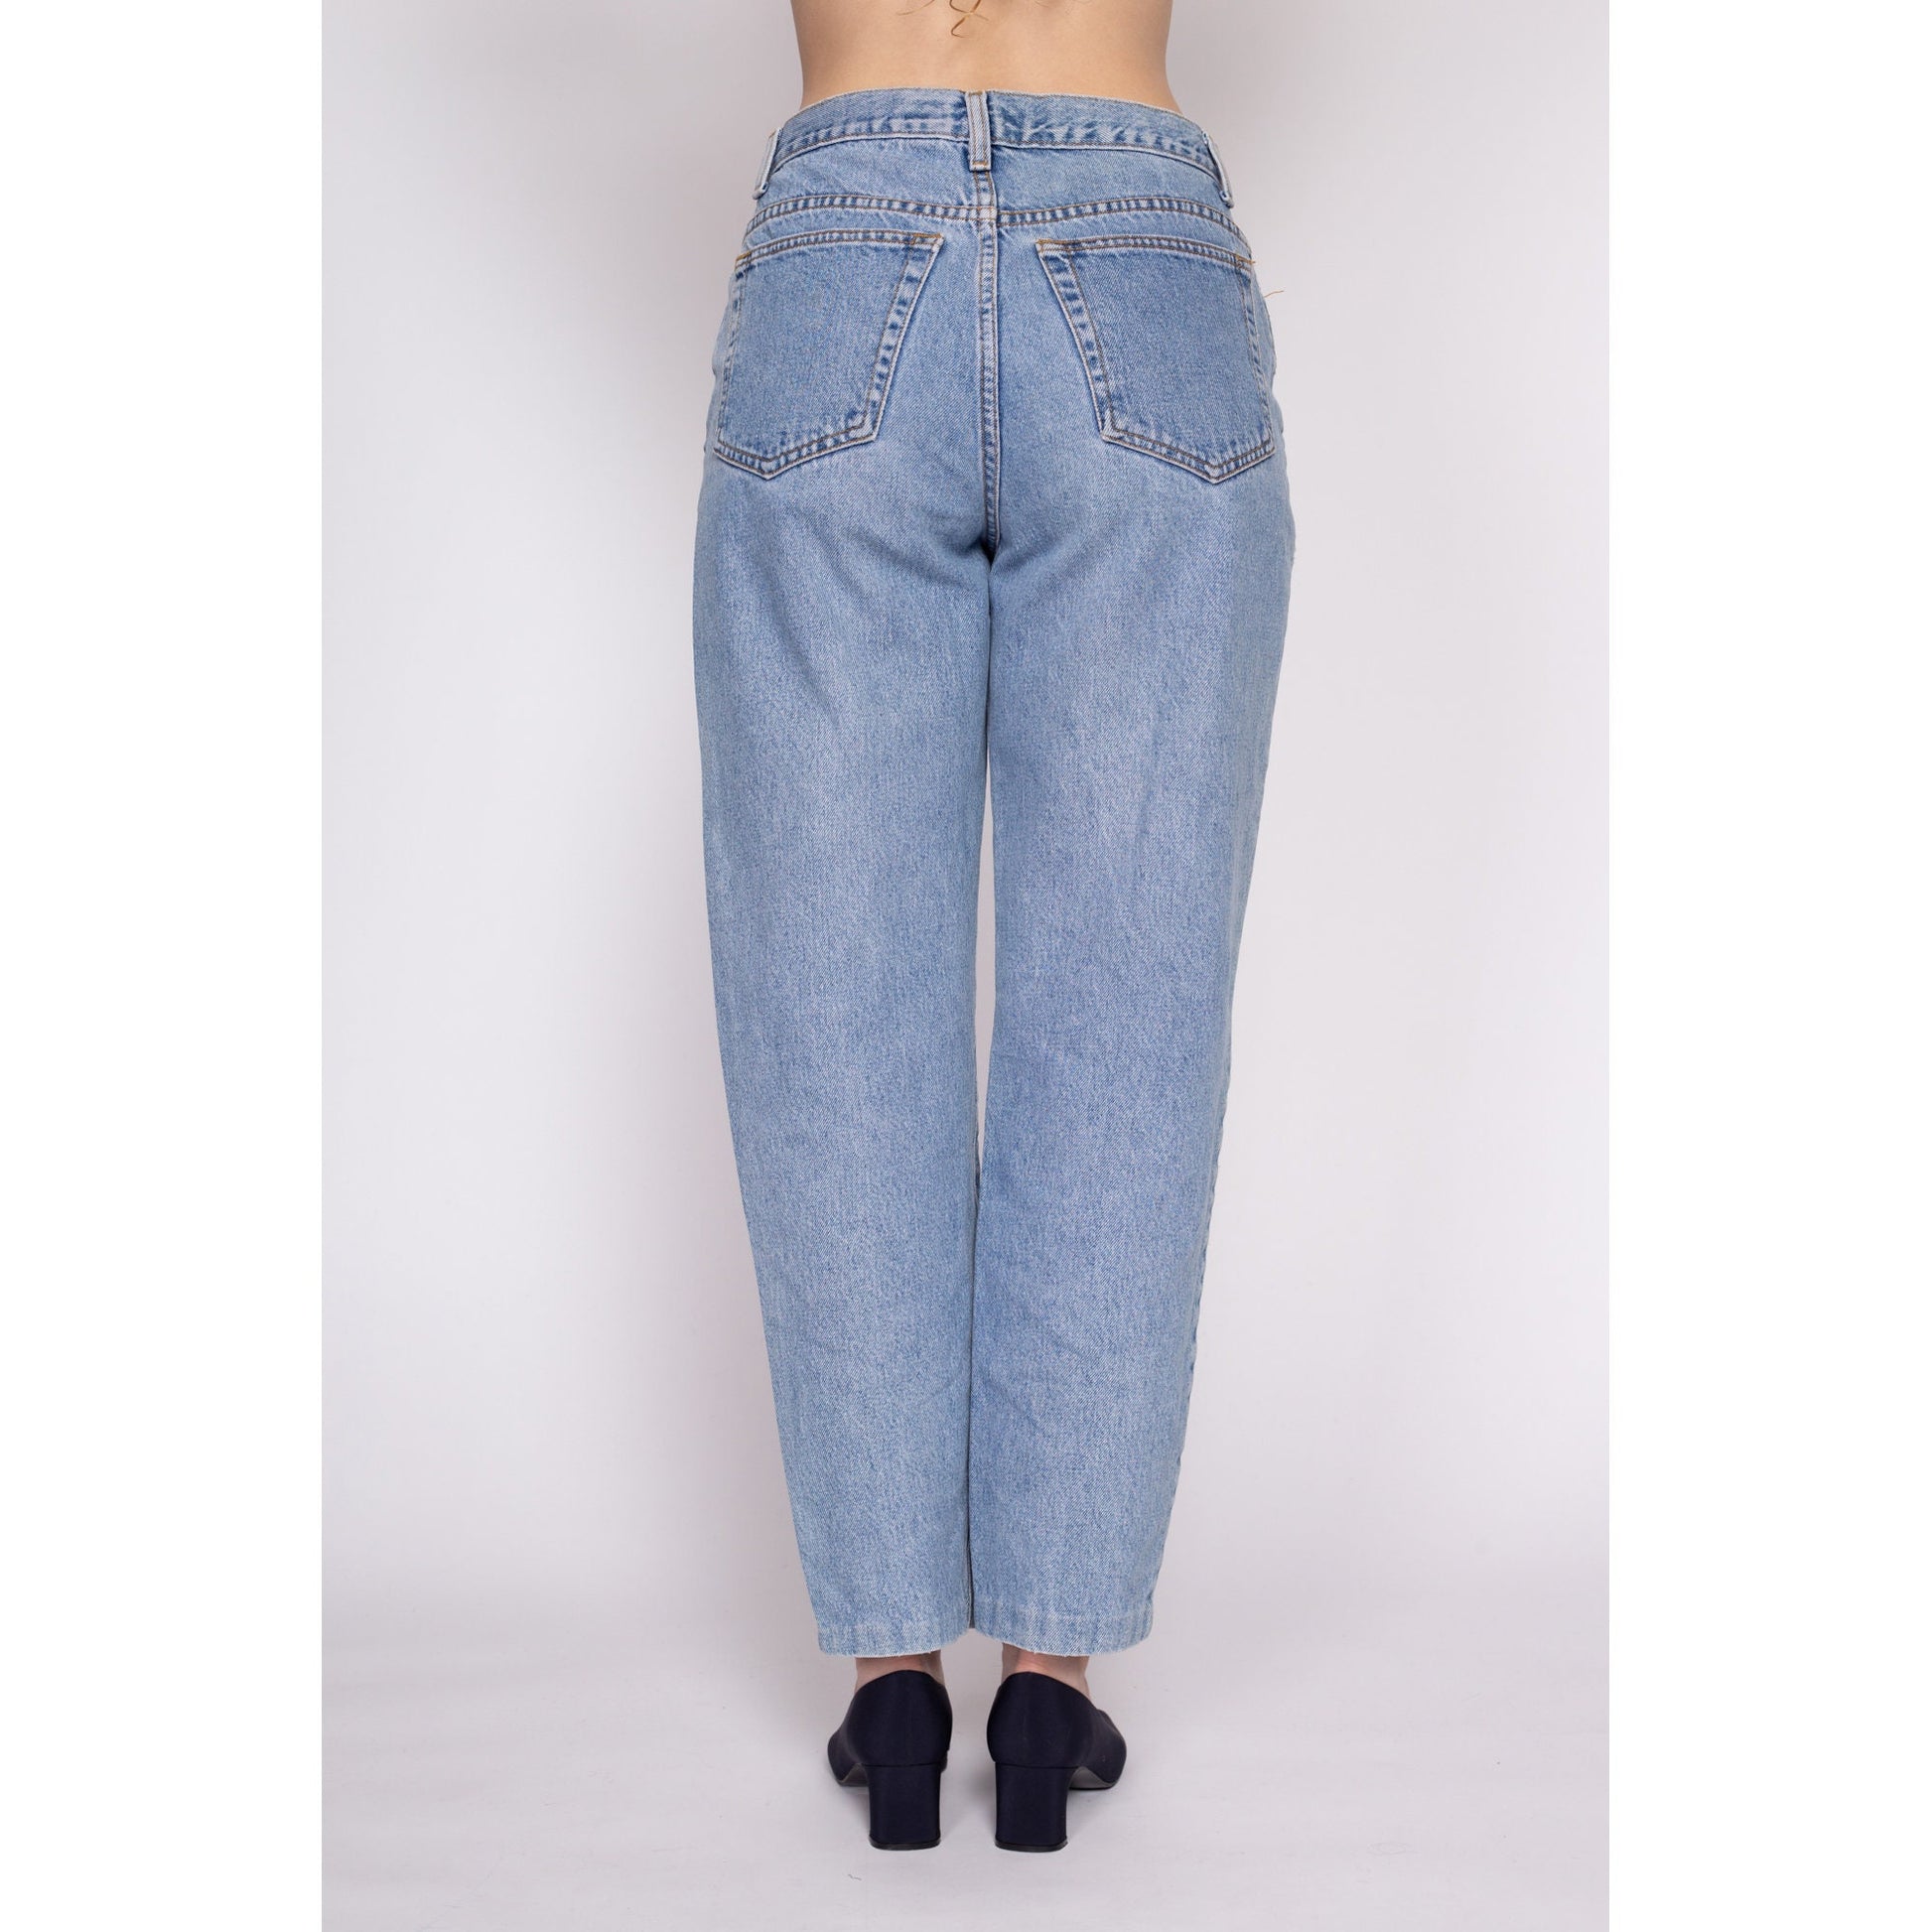 Run and Fly Mom Jeans - High Waist Blue Denim jeans 90's Retro Style  24-36